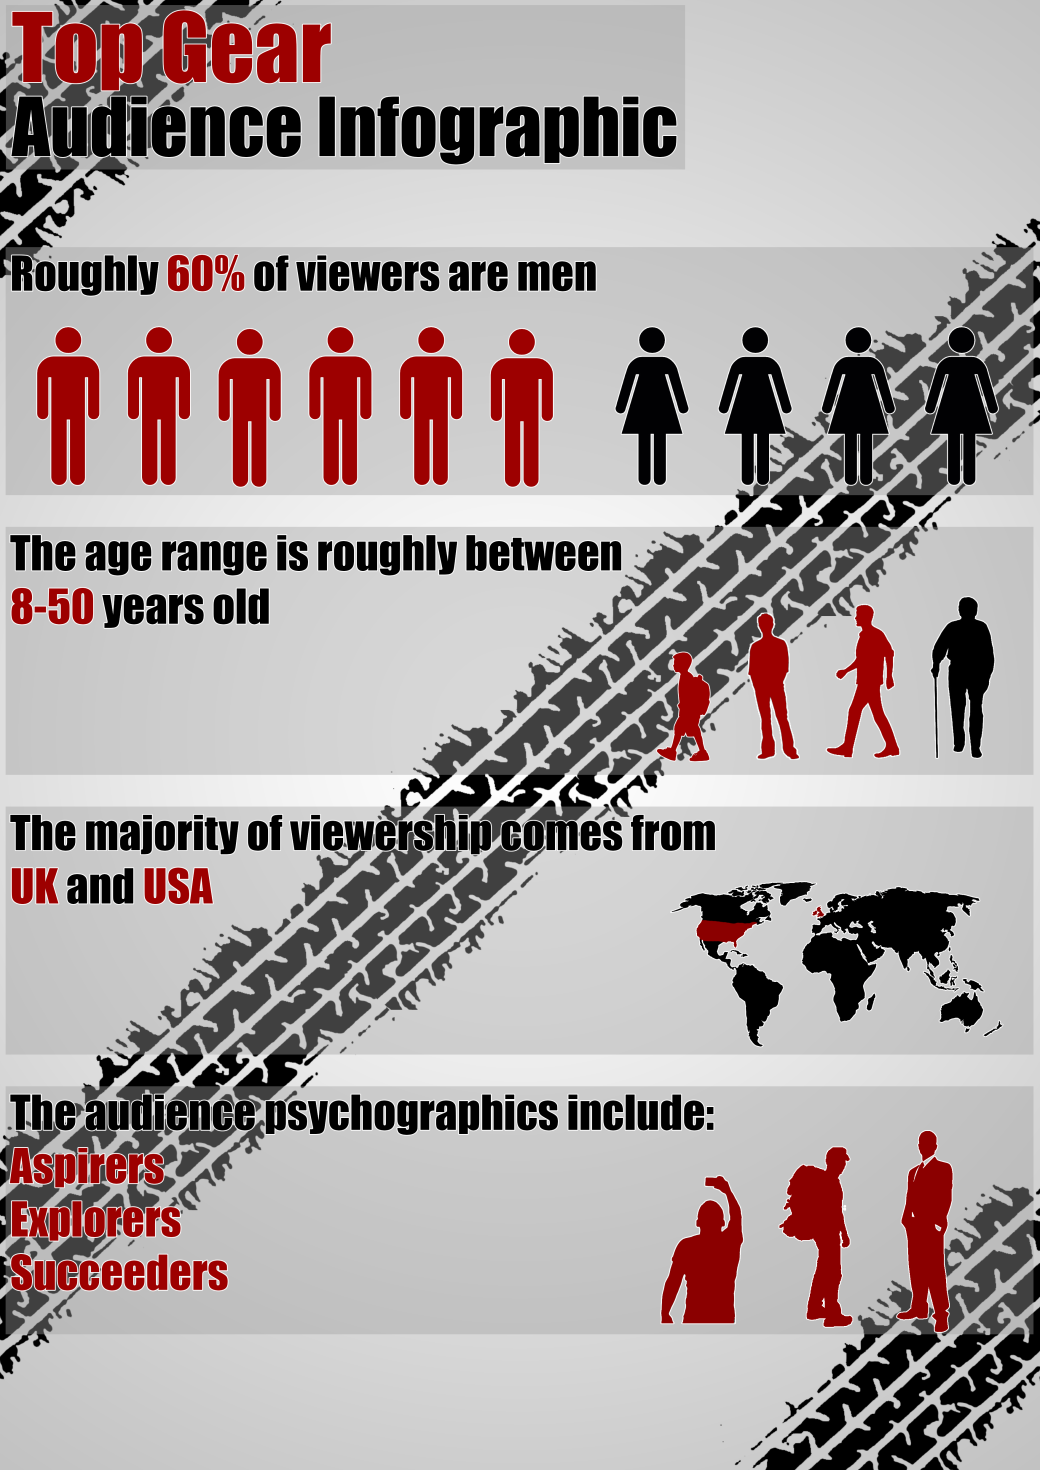 Top Gear Audience Infographic